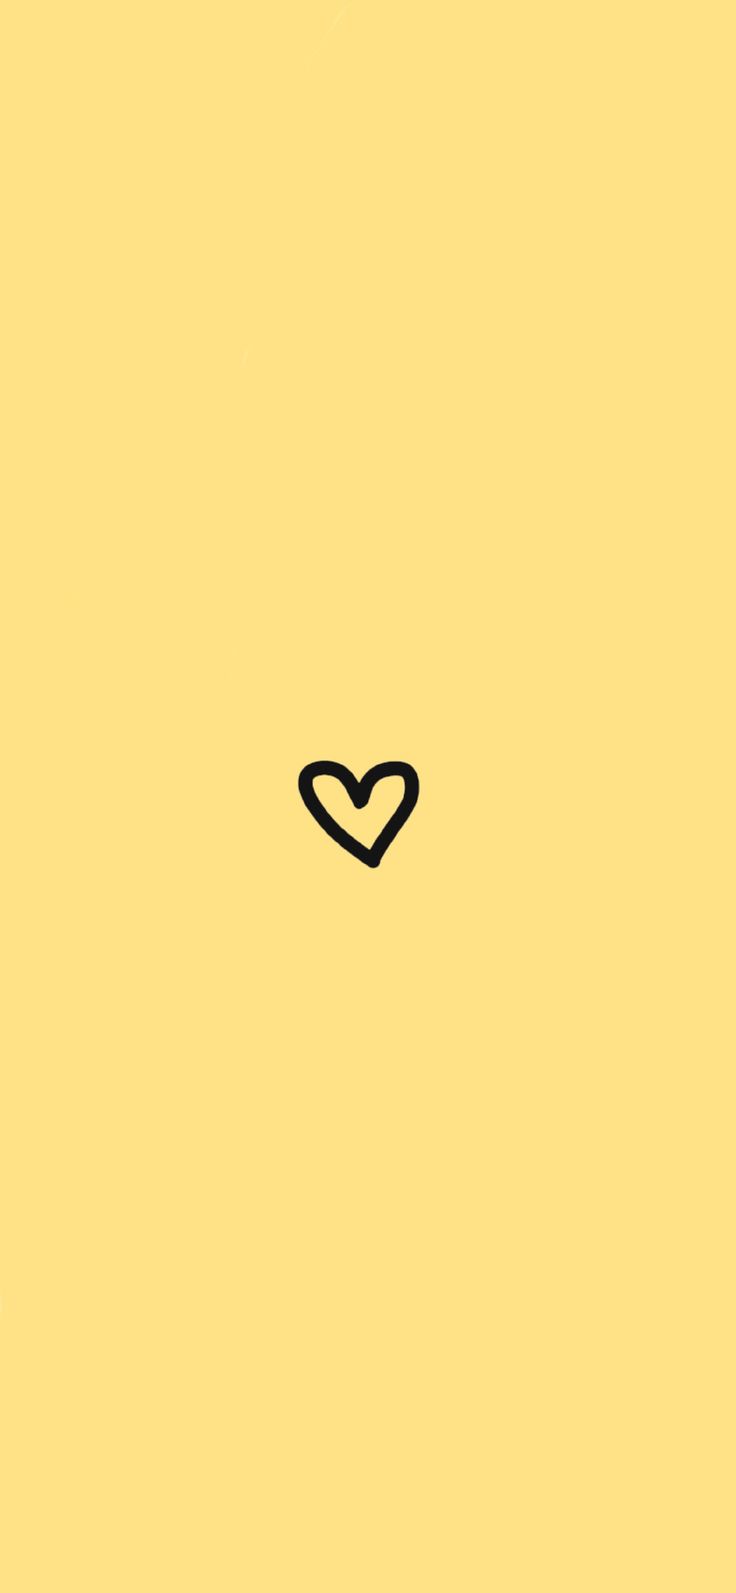 A heart drawn on yellow background - Light yellow